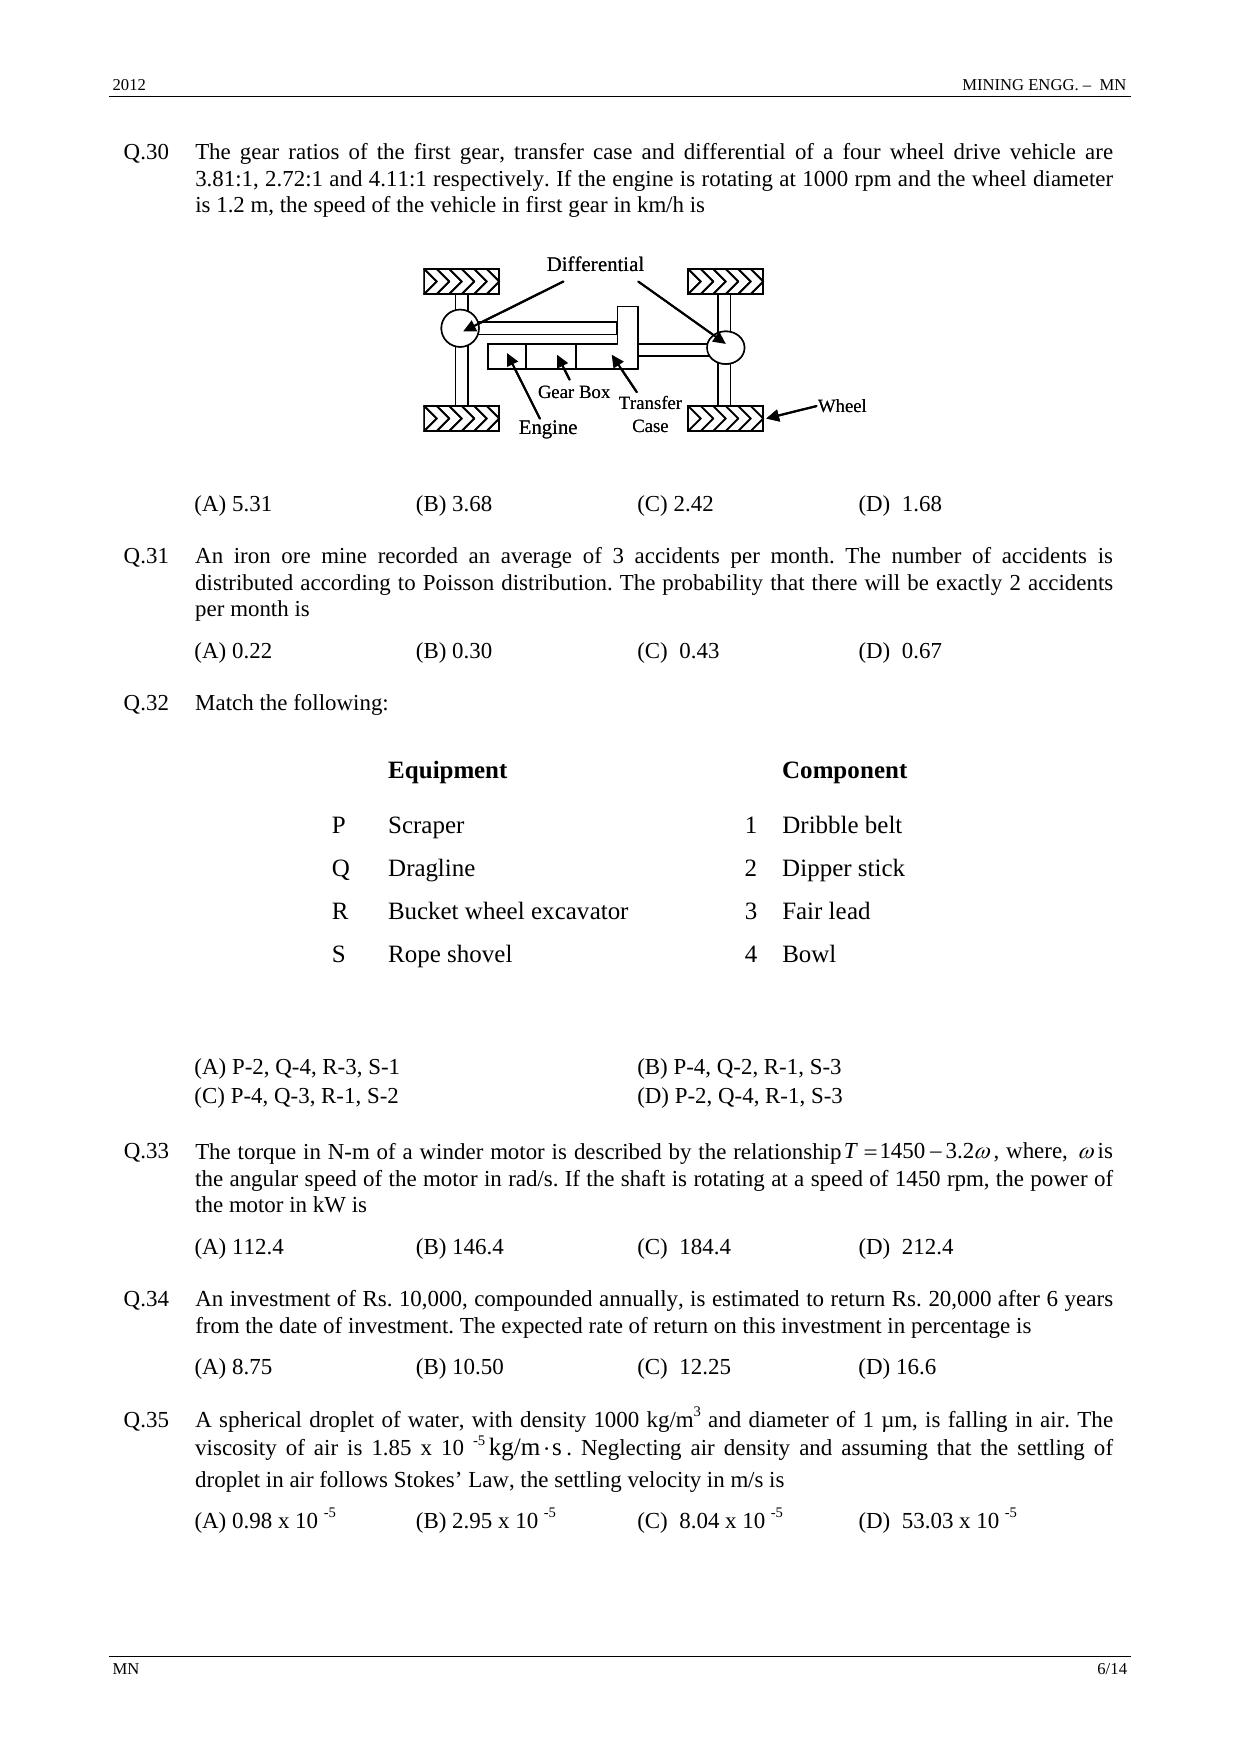 GATE 2012 Mining Engineering (MN) Question Paper with Answer Key - Page 6